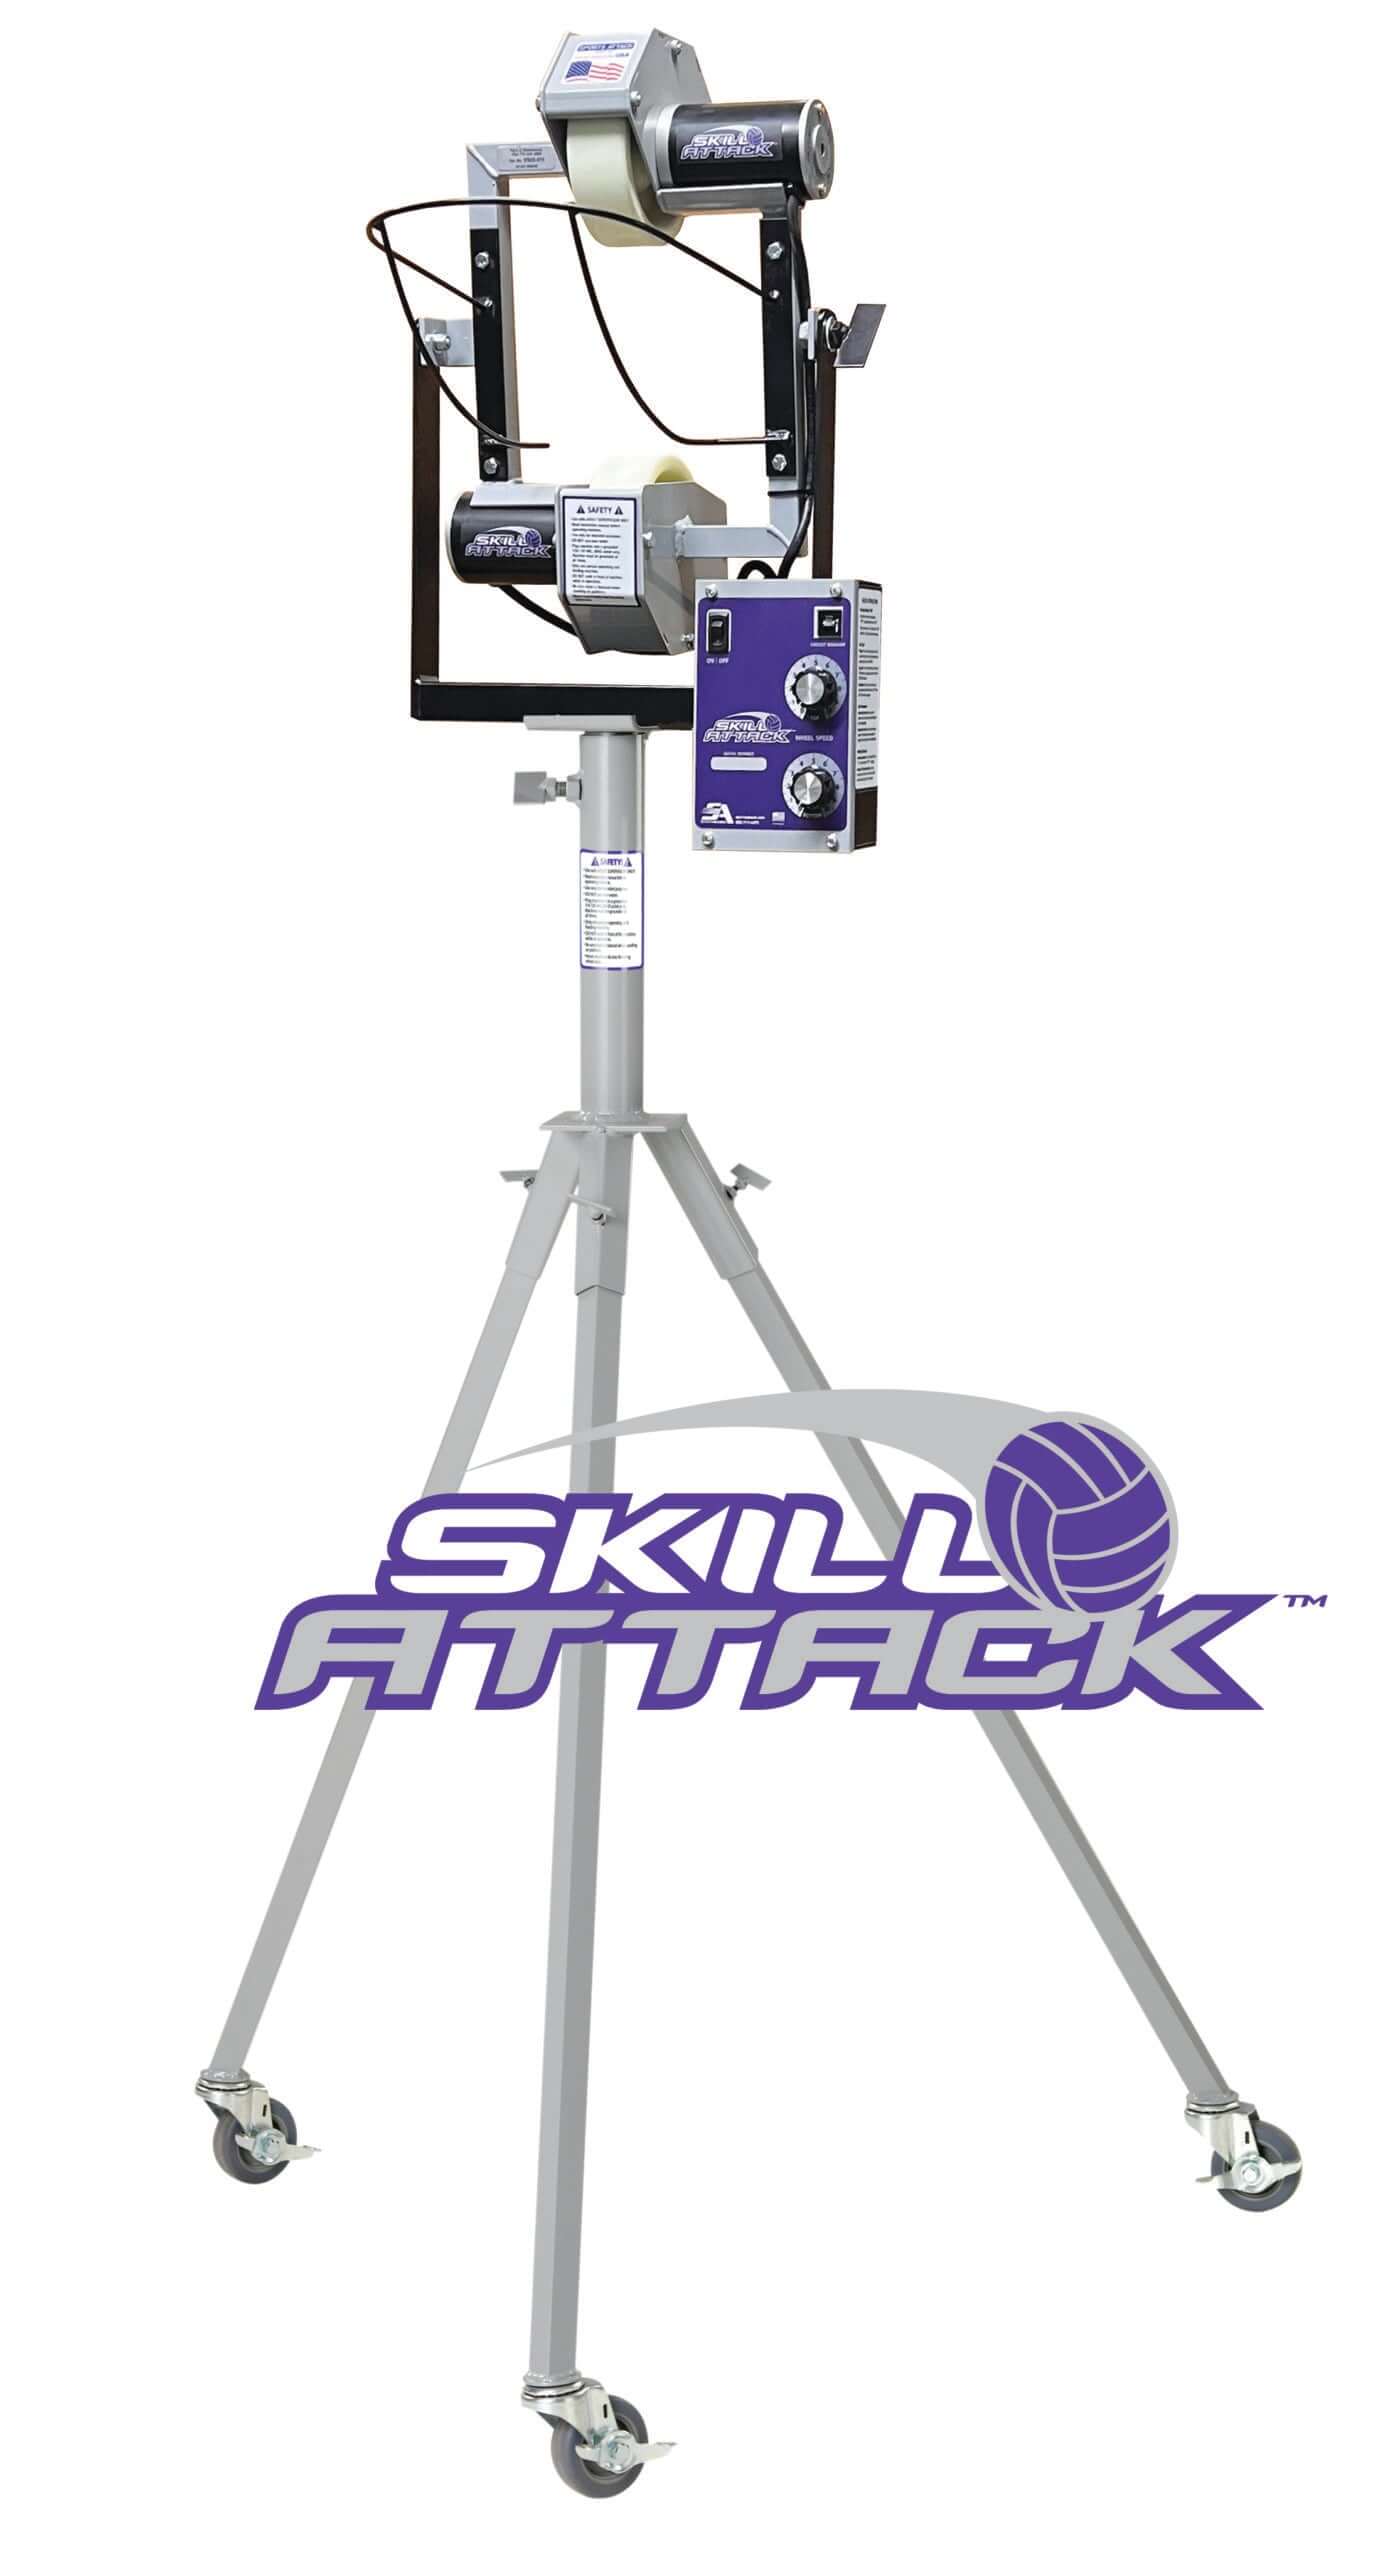 Sports Attack Skill Attack Volleyball Pitching Machine - High-Release Point - 40 MPH Spins - Portable &amp; Durable - Volleyball Training - Pitch Machine Pros